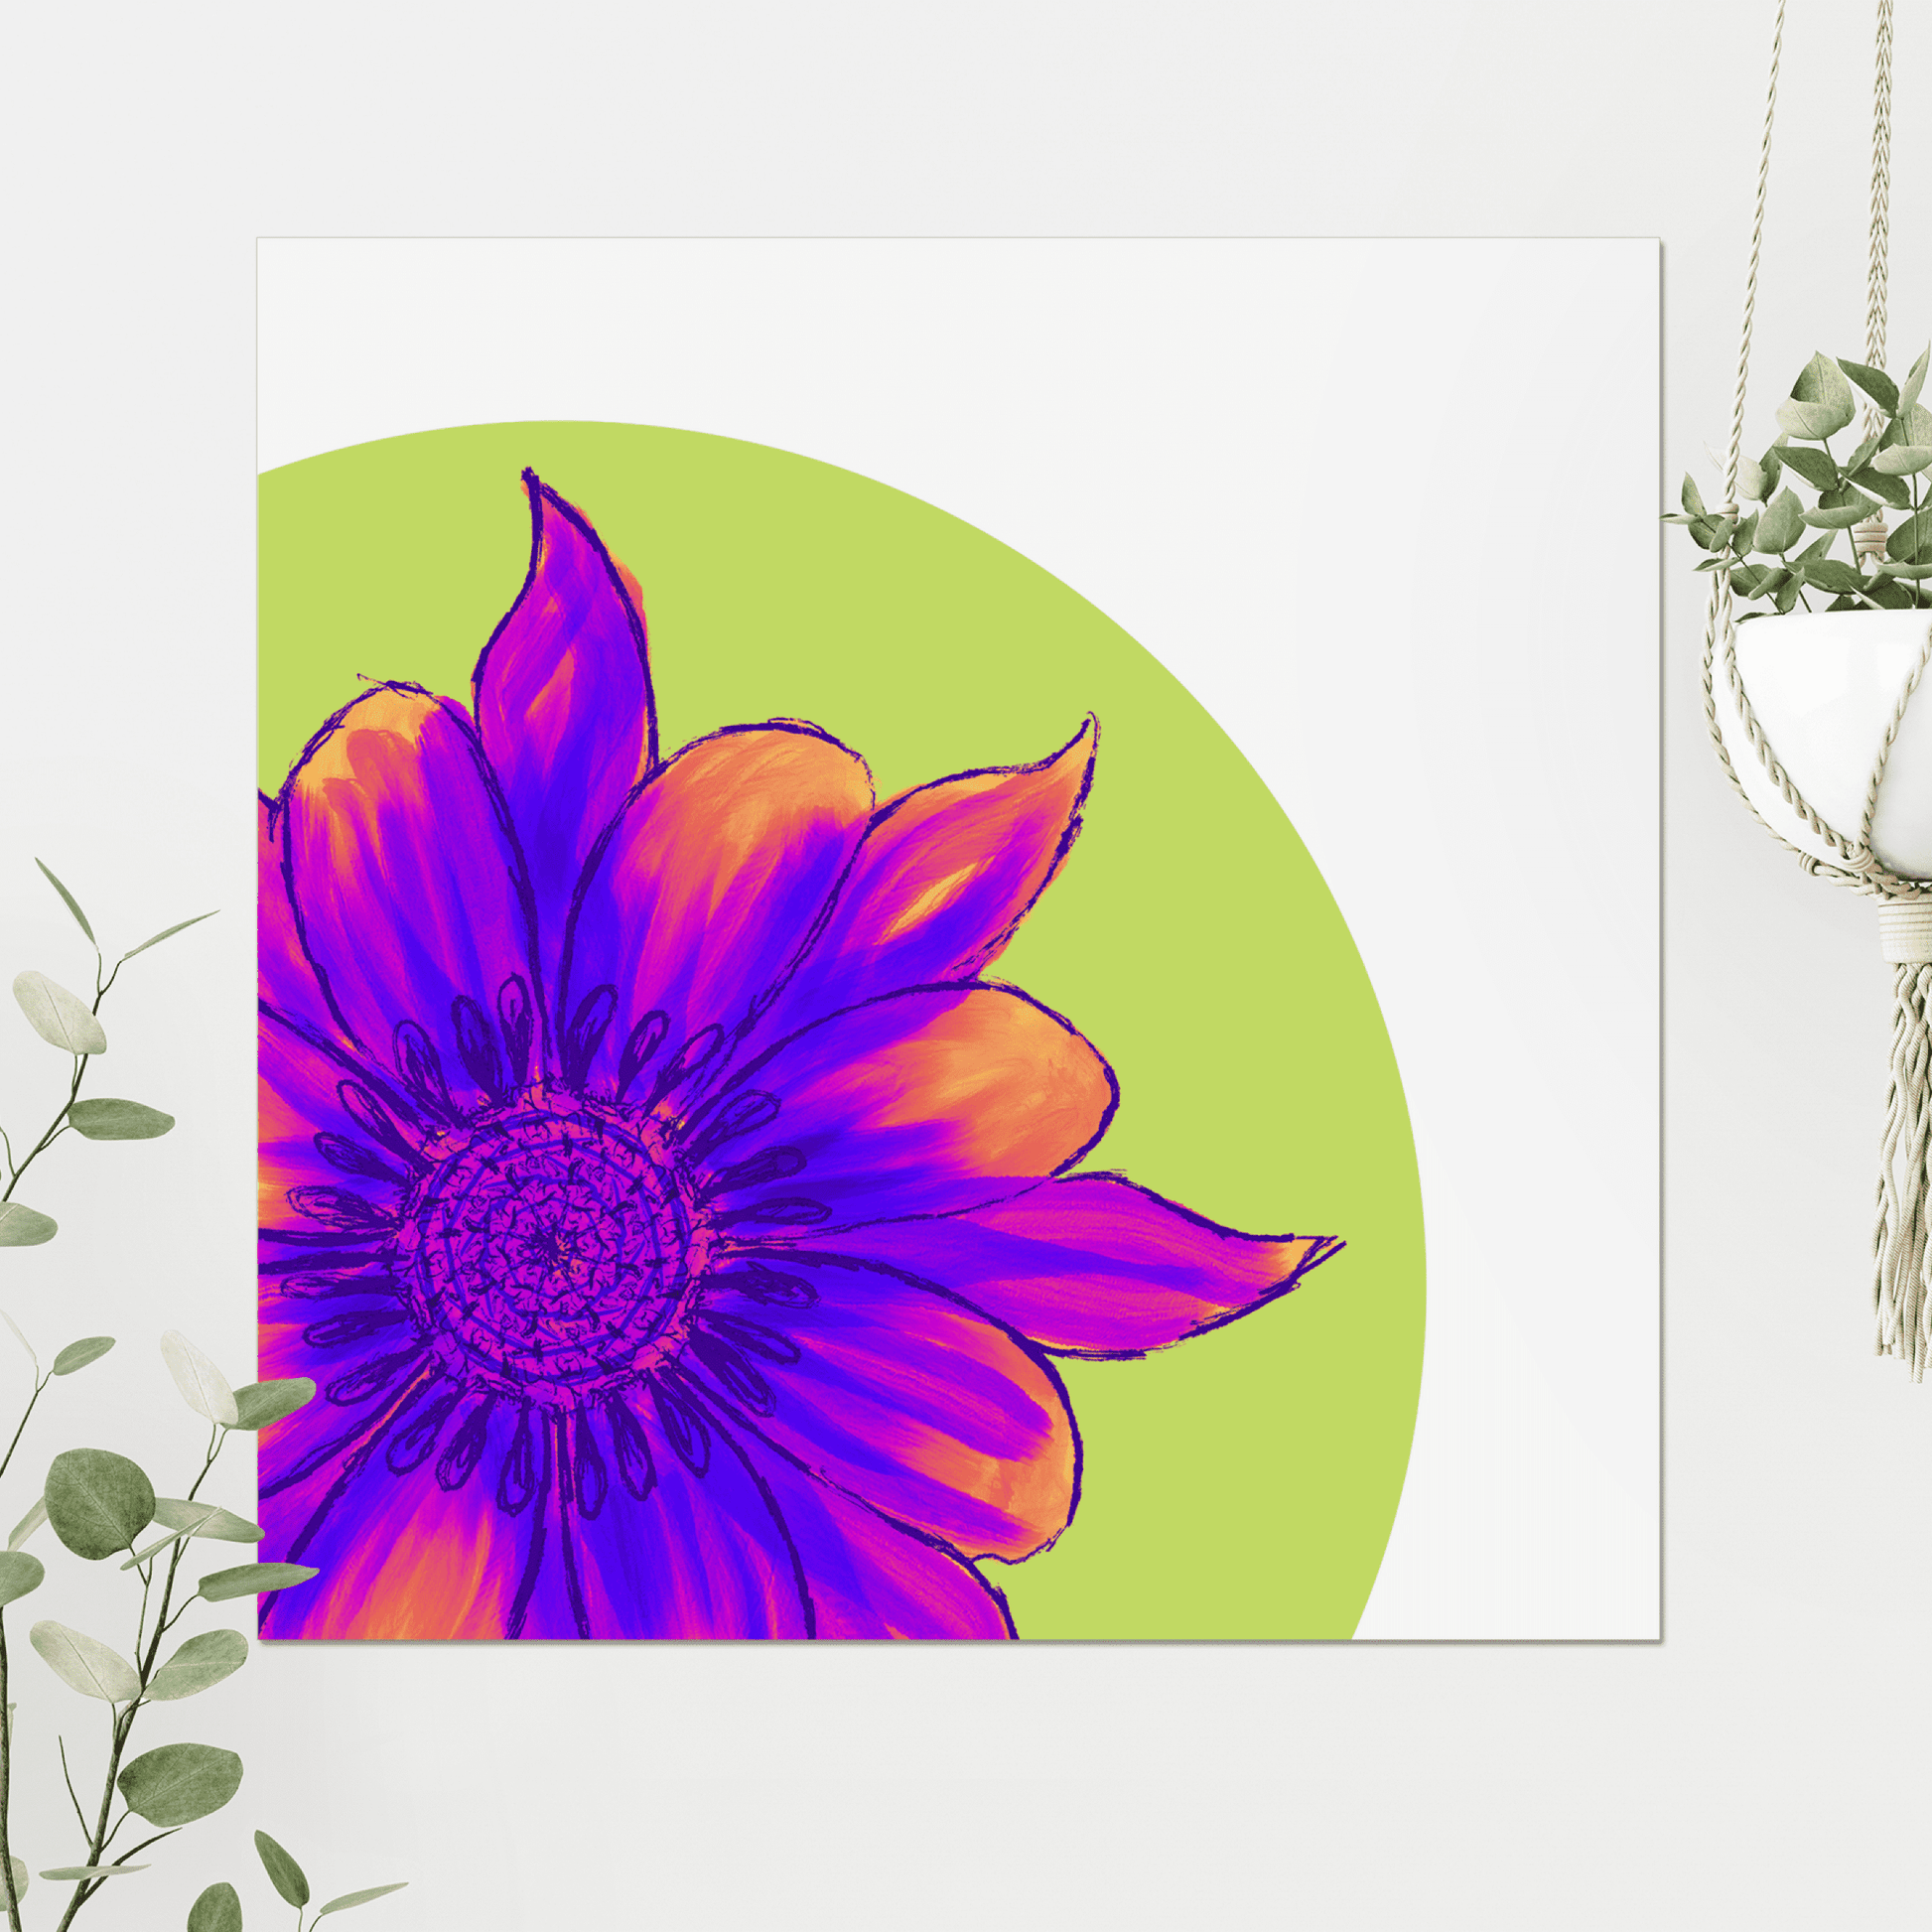 A bright and trippy, acid toned flower print.  This art print is sure to add some eclectic vibes to your walls. The acid greens, pinks and purples really pop. And the paint effect flower is truly stunning.   A statement for your decor, standalone or as part of you gallery wall.